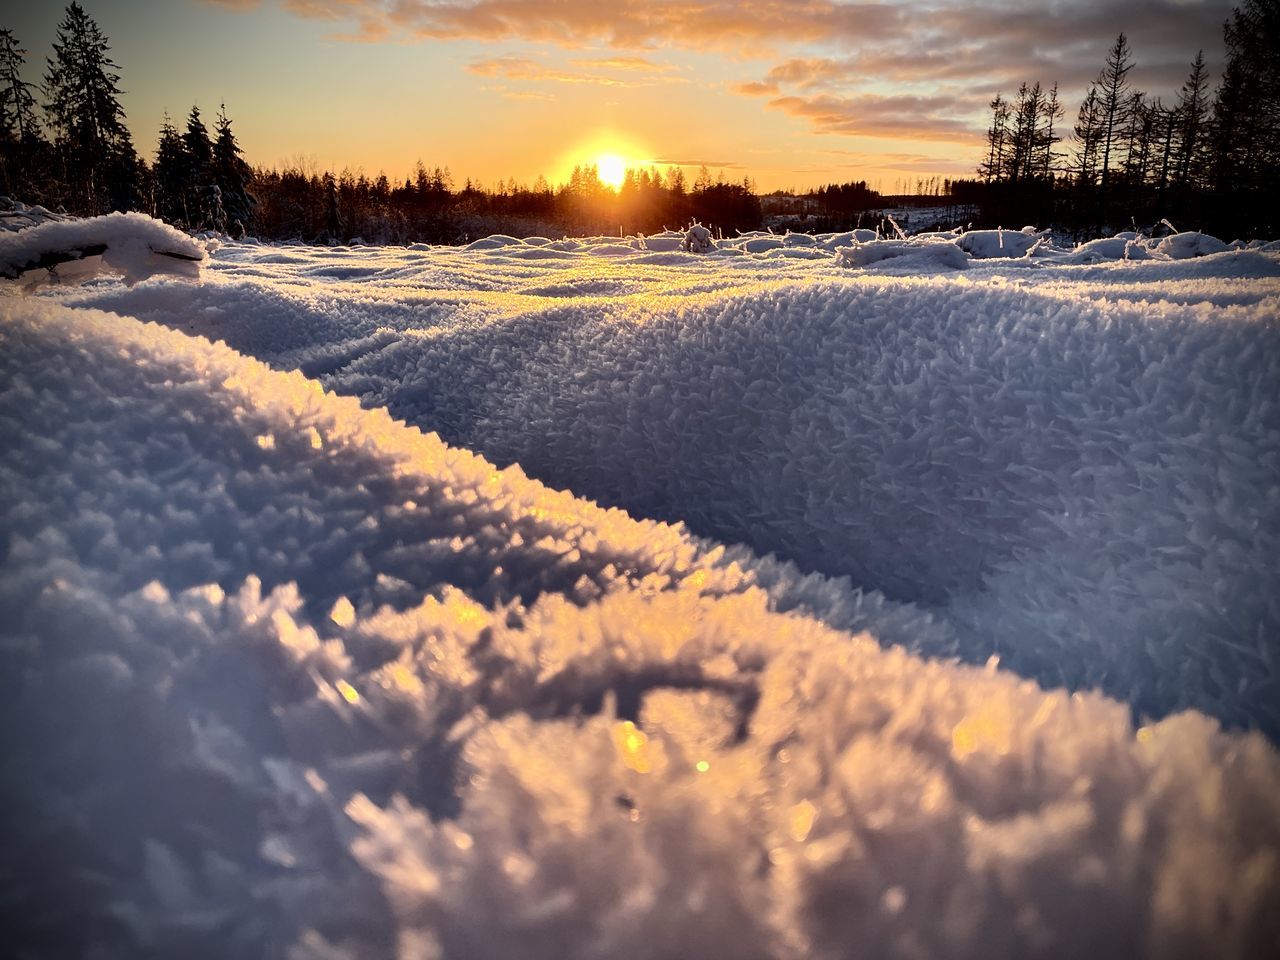 sky, sunset, snow, winter, cold temperature, cloud, nature, sunlight, beauty in nature, environment, landscape, plant, scenics - nature, tree, land, tranquility, sun, frozen, tranquil scene, no people, dawn, ice, evening, coniferous tree, pinaceae, reflection, rural scene, outdoors, pine tree, forest, freezing, non-urban scene, idyllic, frost, dramatic sky, white, field